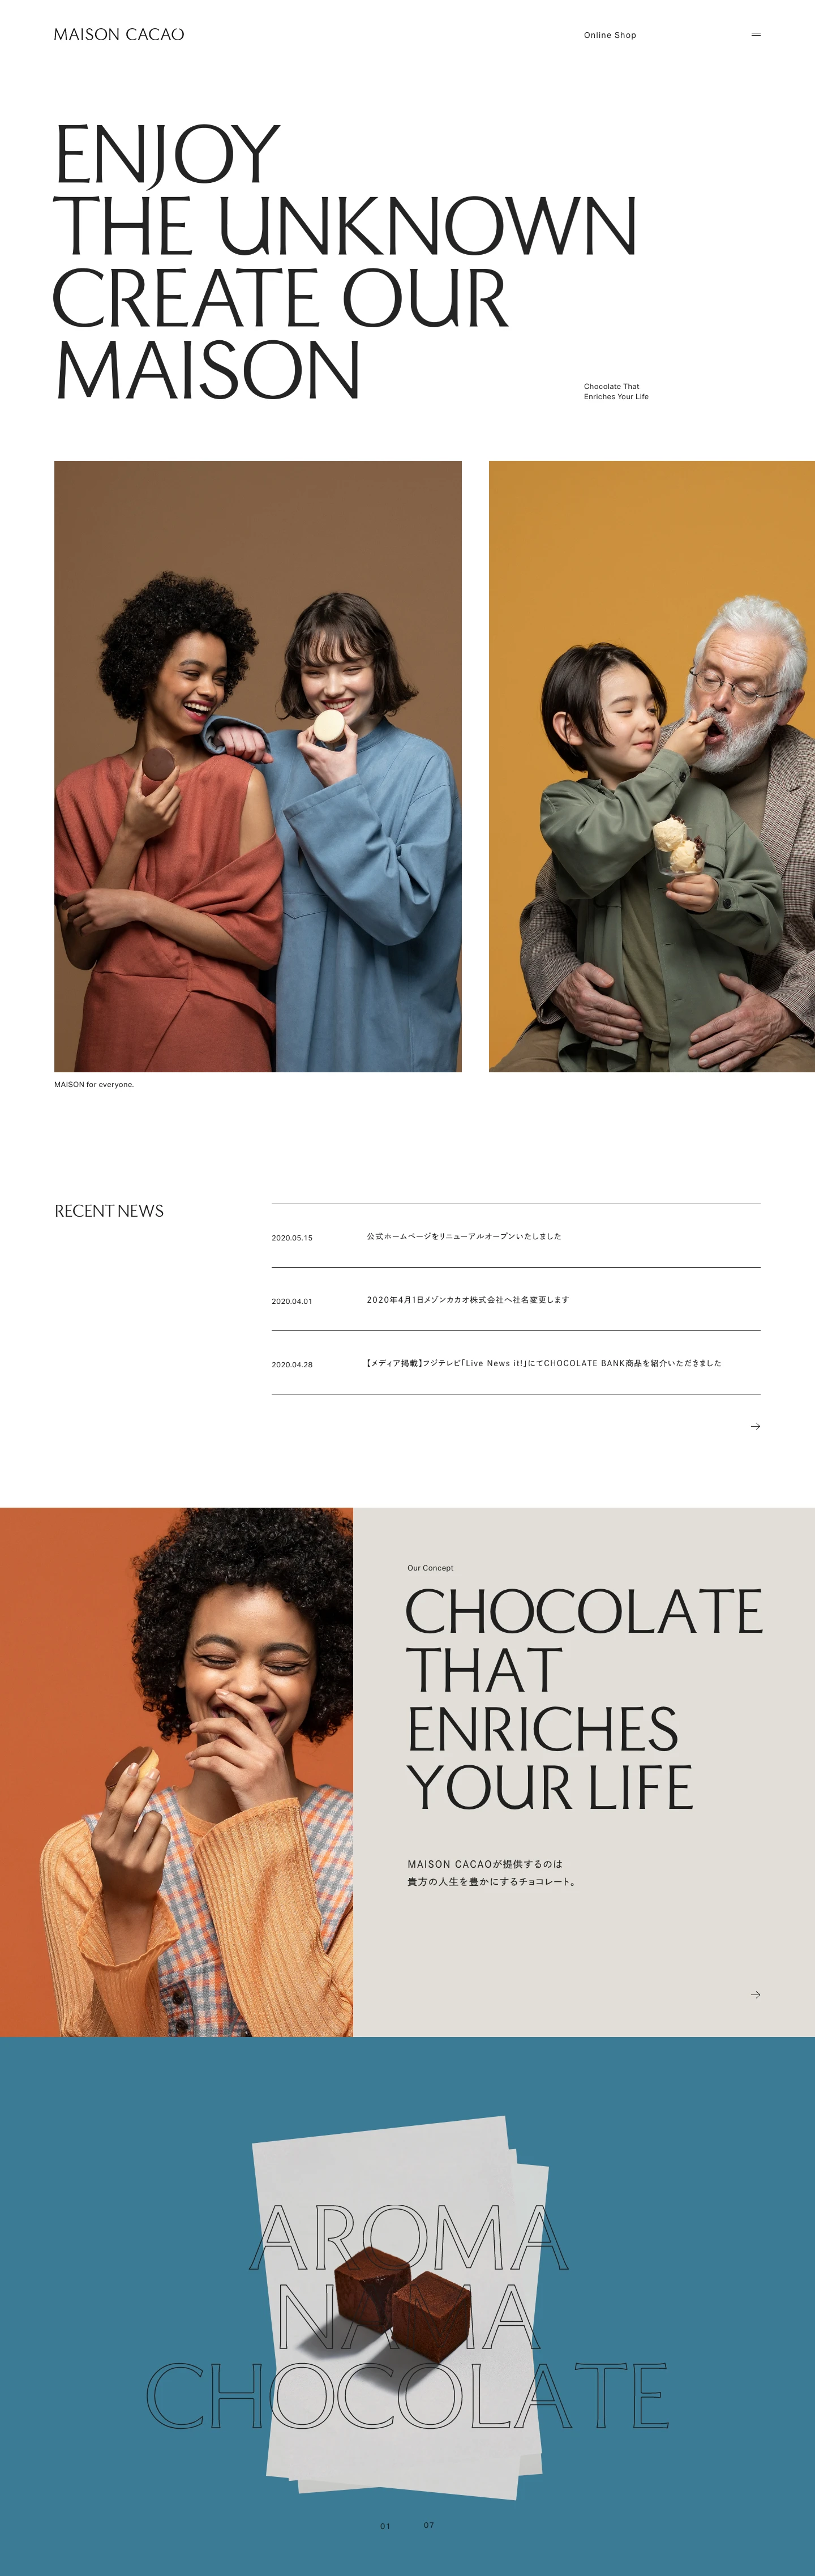 MAISON CACAO Landing Page Example: Chocolate That Enriches Your Life